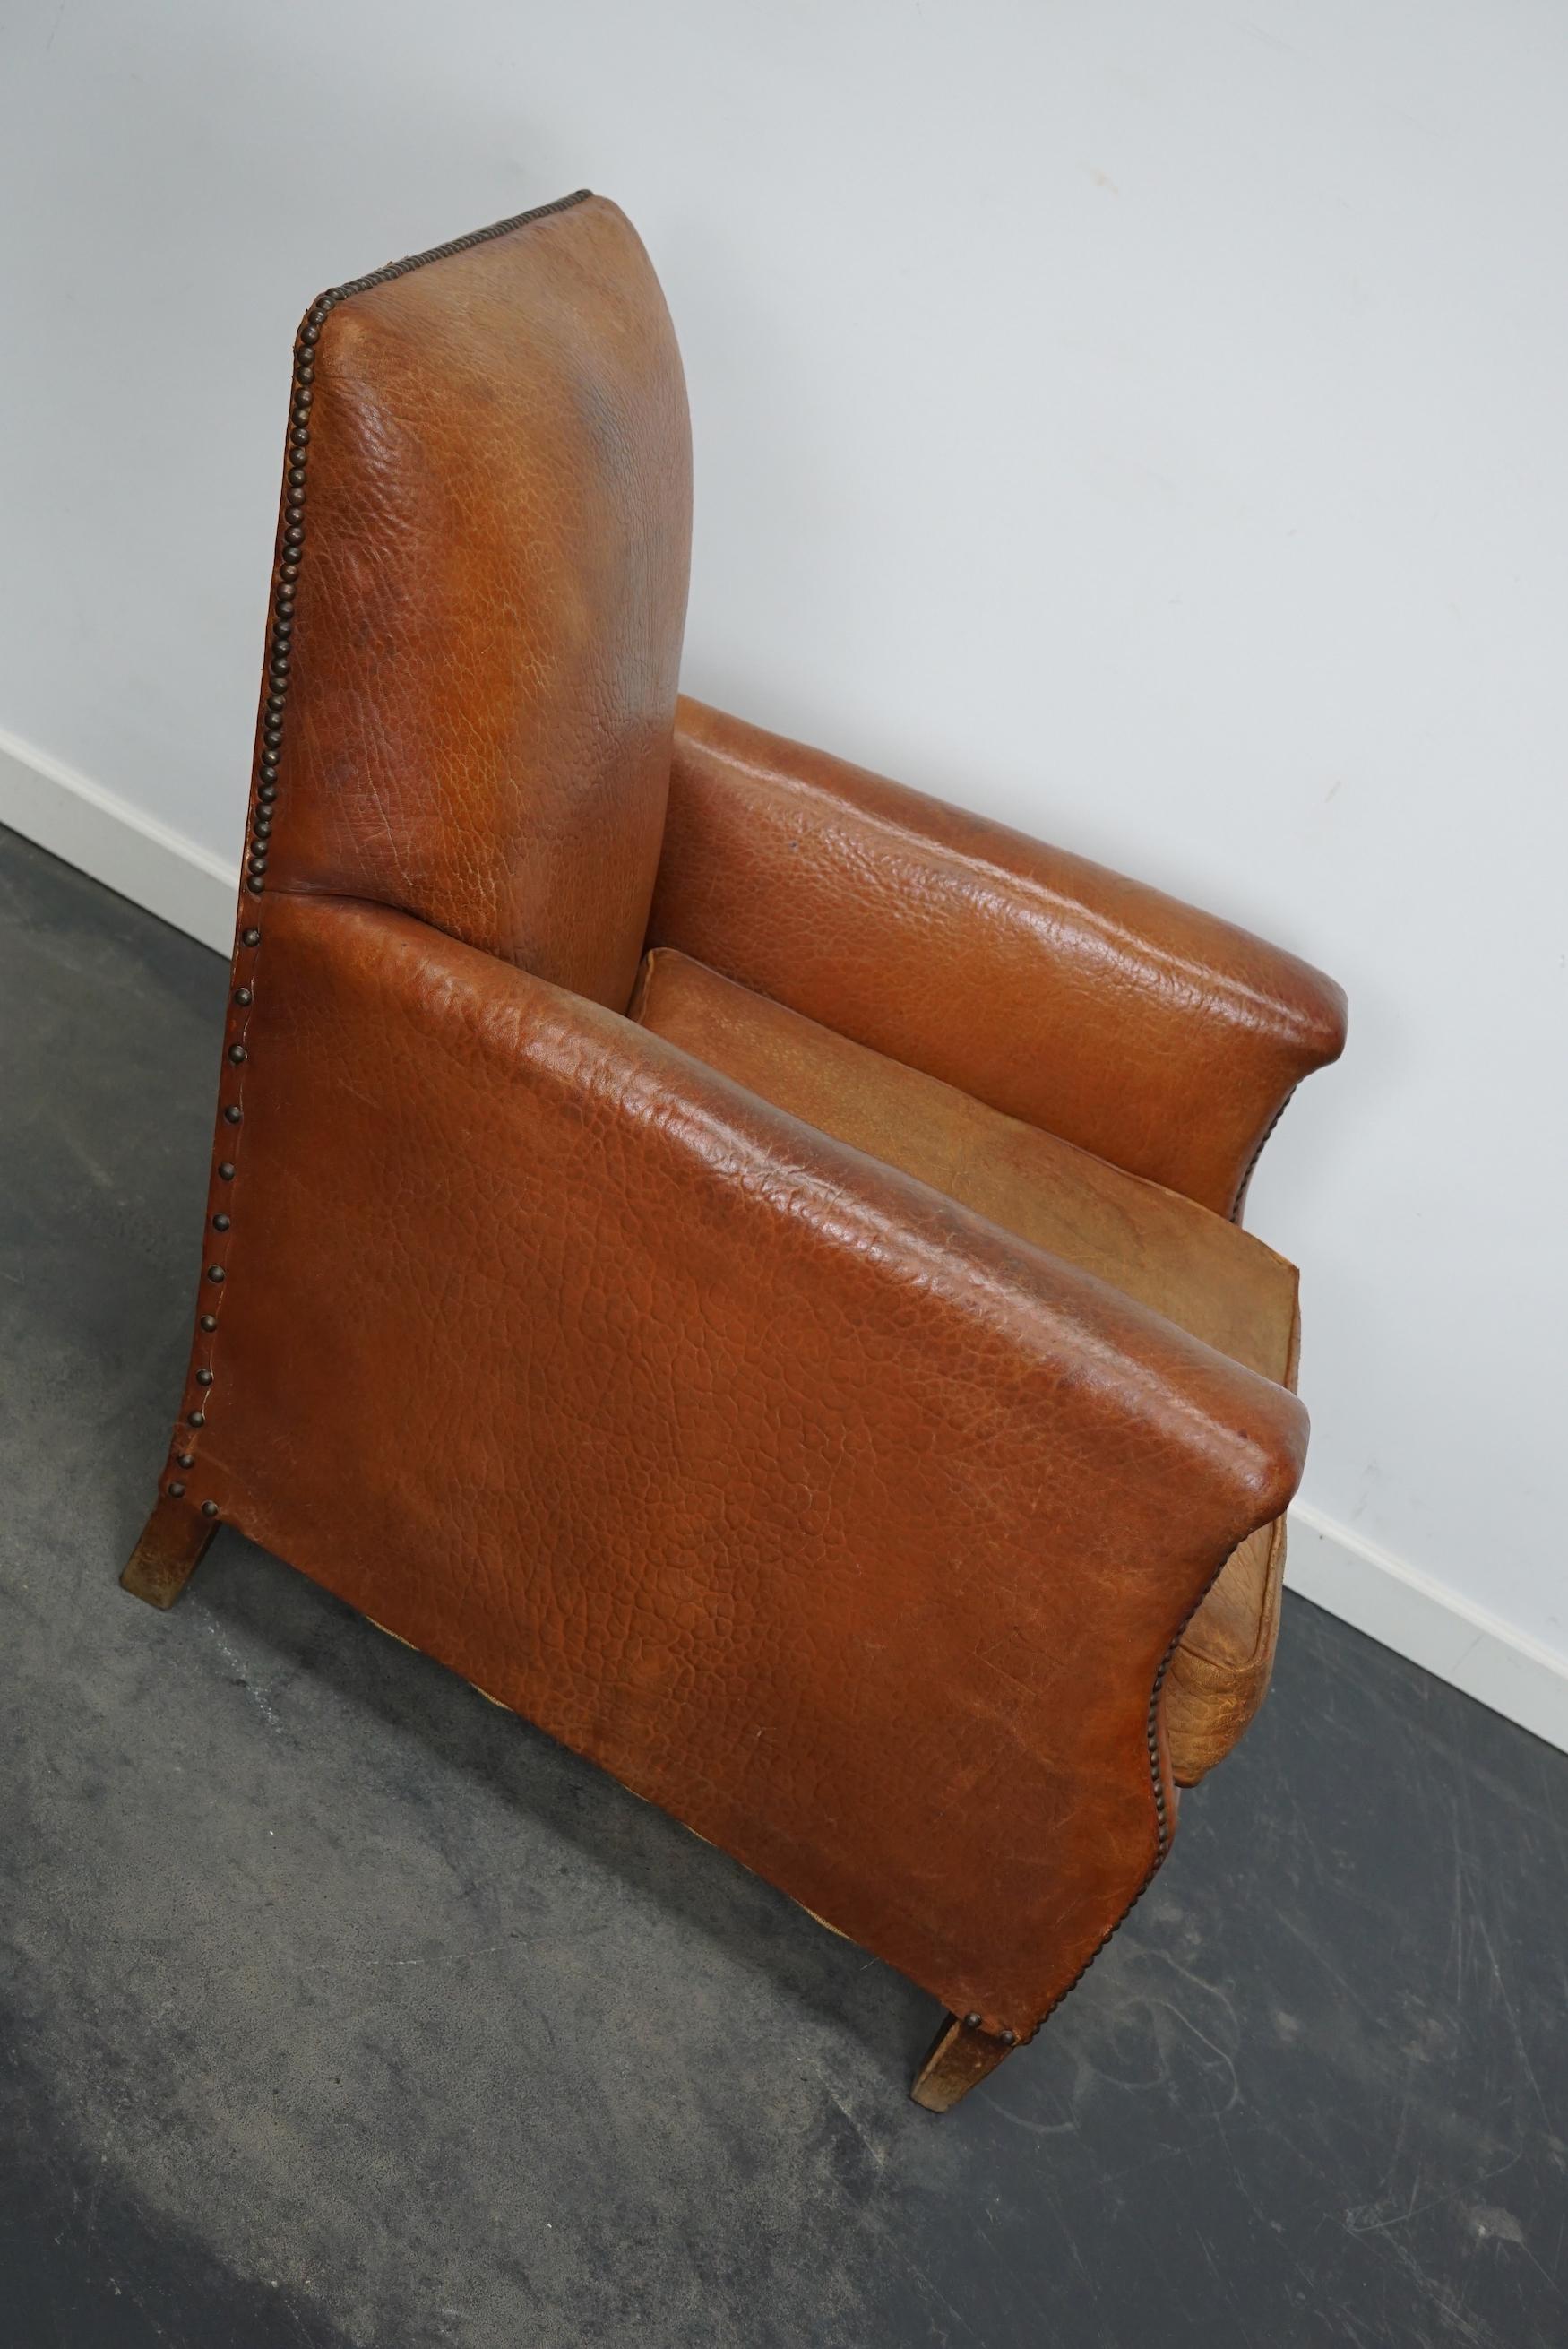 Vintage French Cognac-Colored Leather Club Chair, 1940s For Sale 1